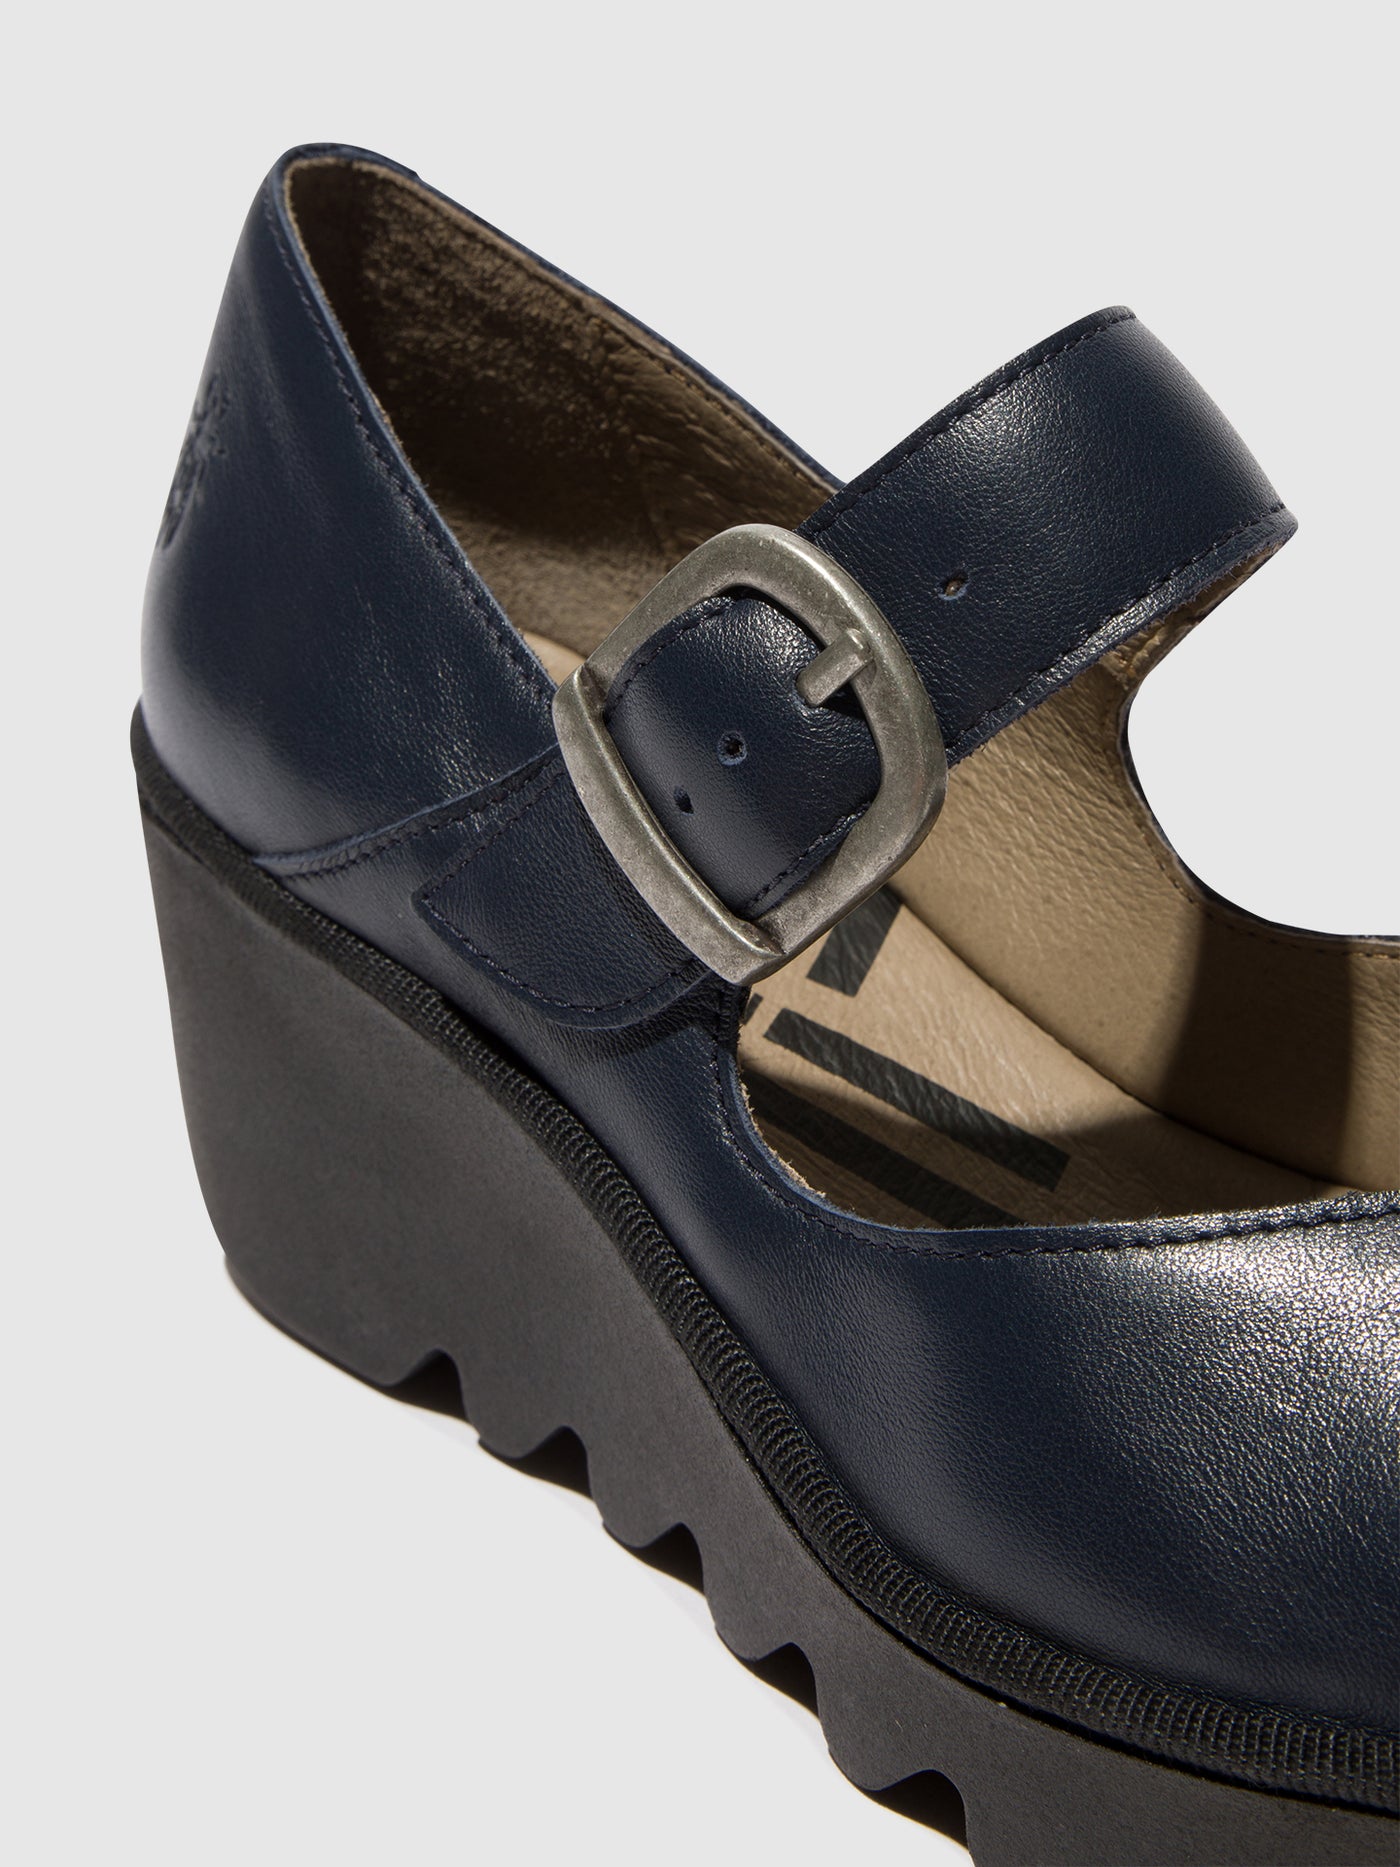 Buckle Shoes BAXE428FLY NAVY